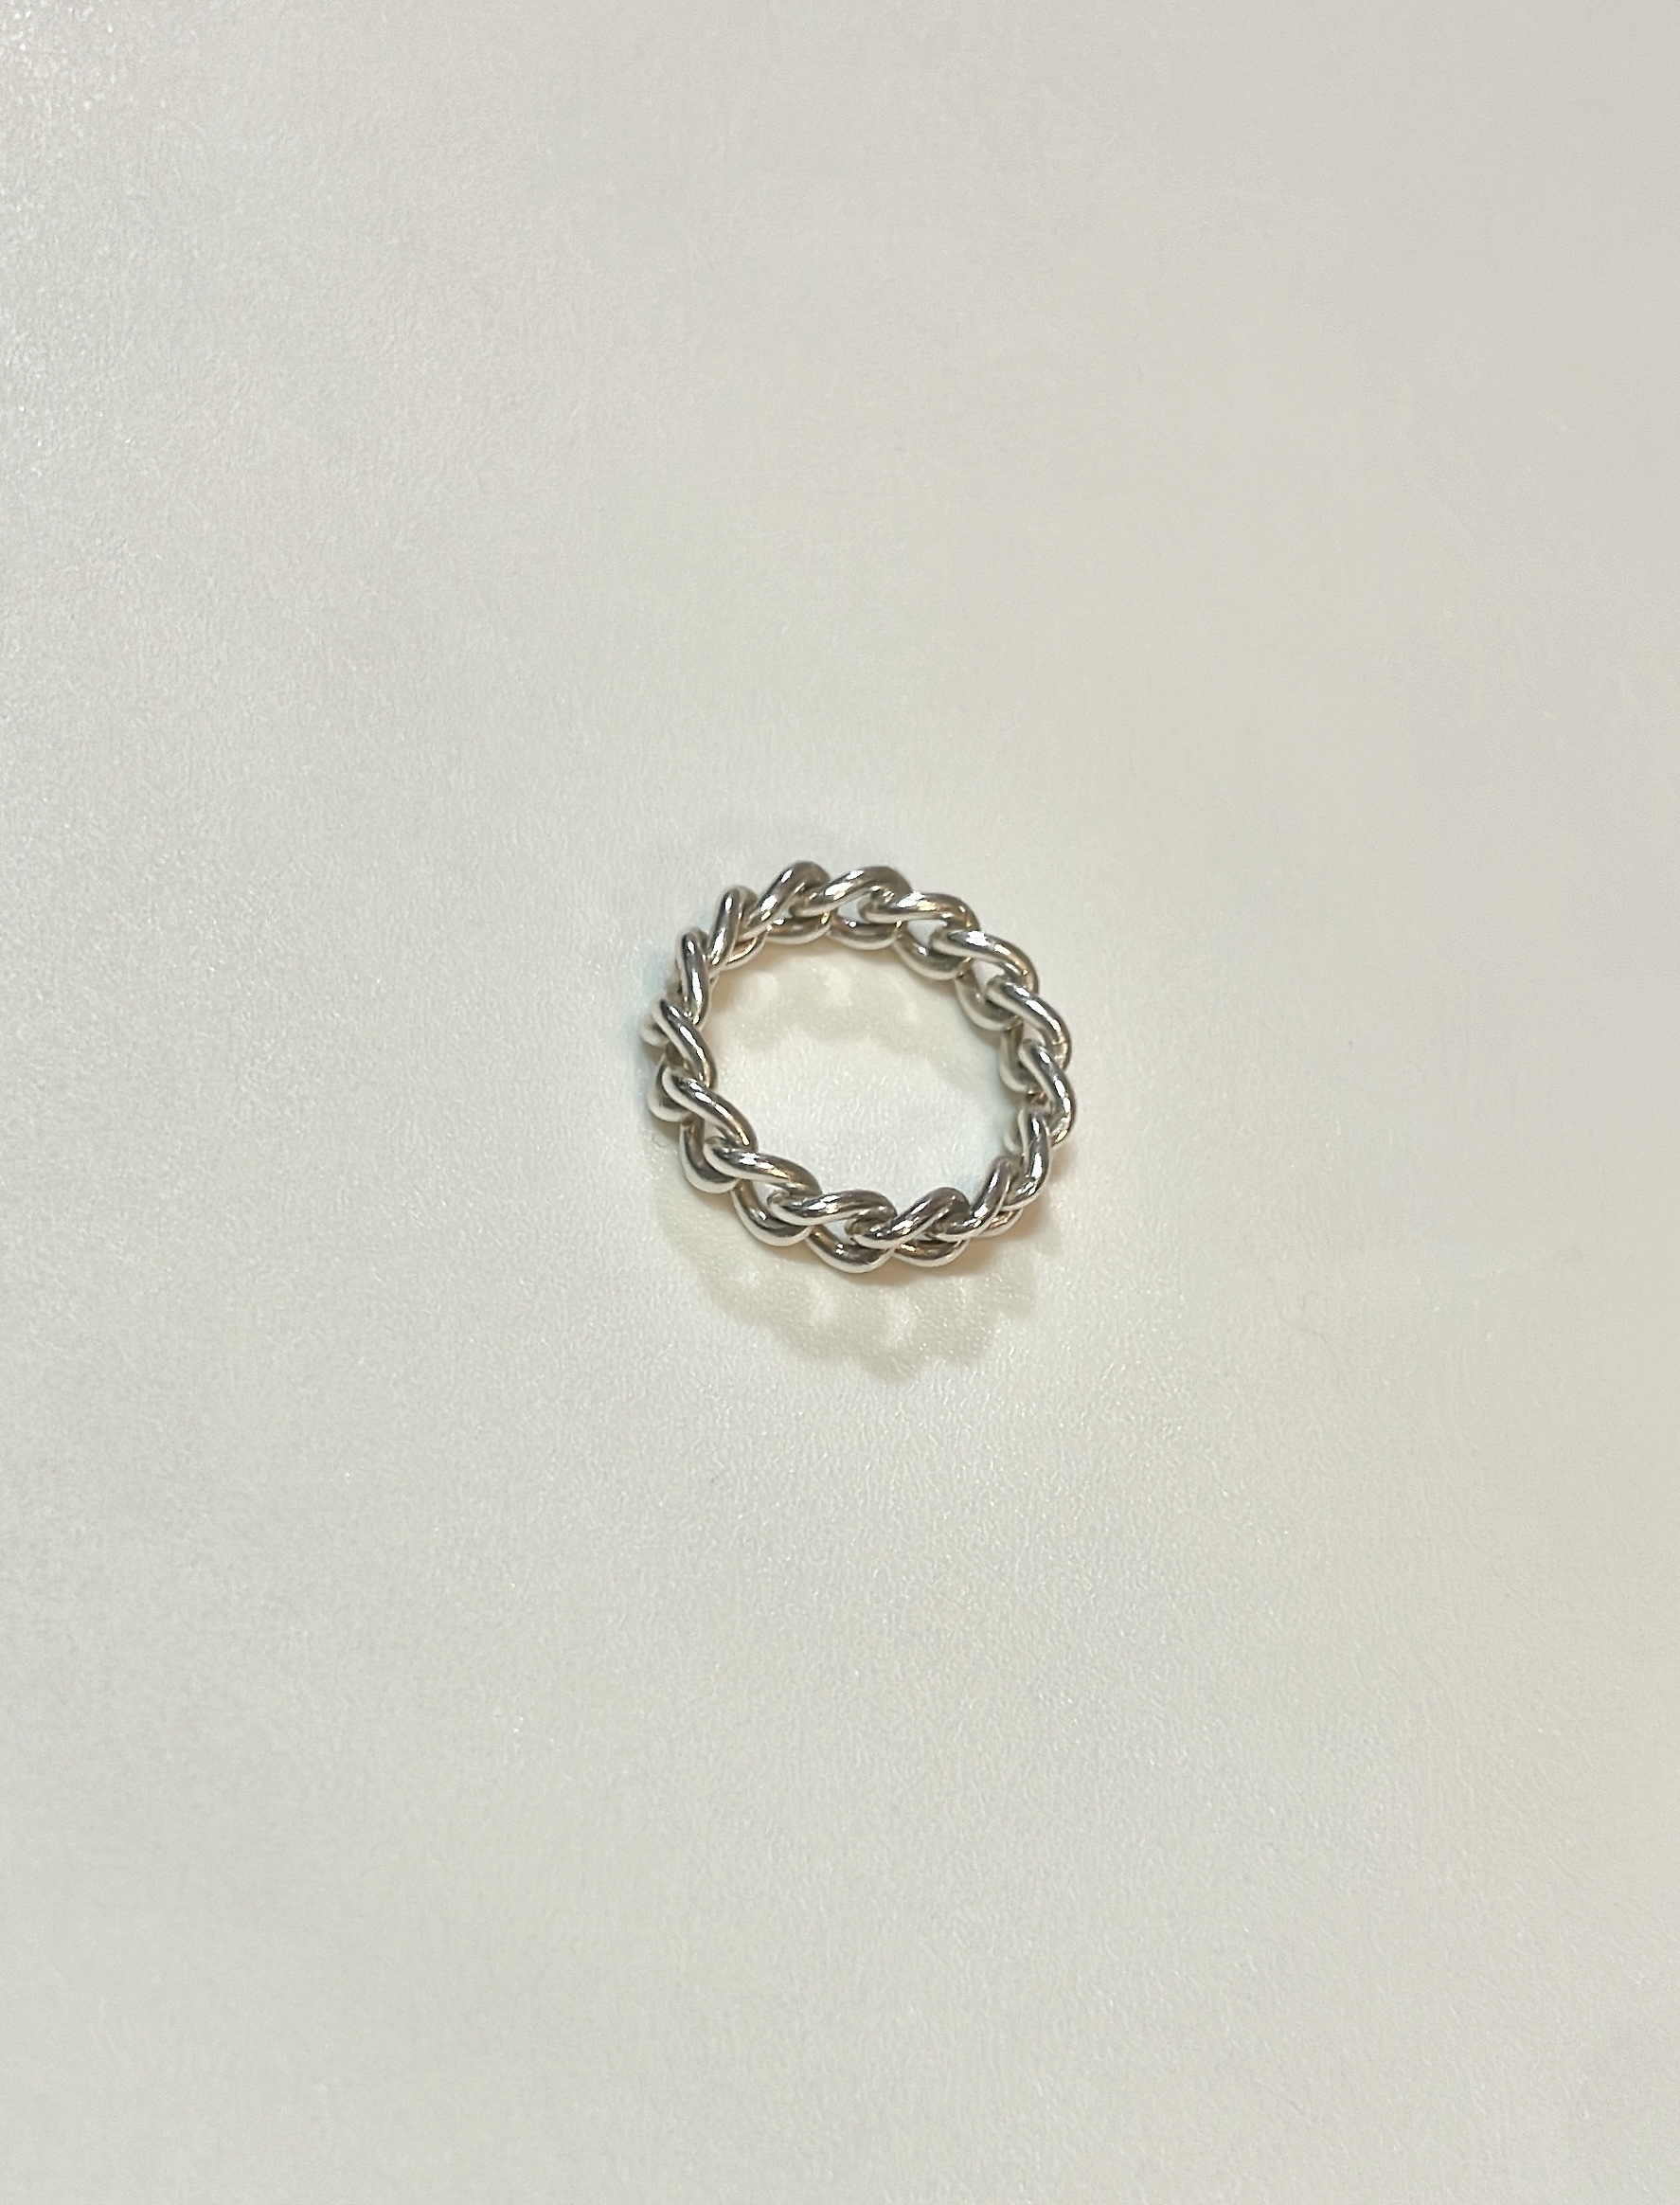 Chain ring 4mm